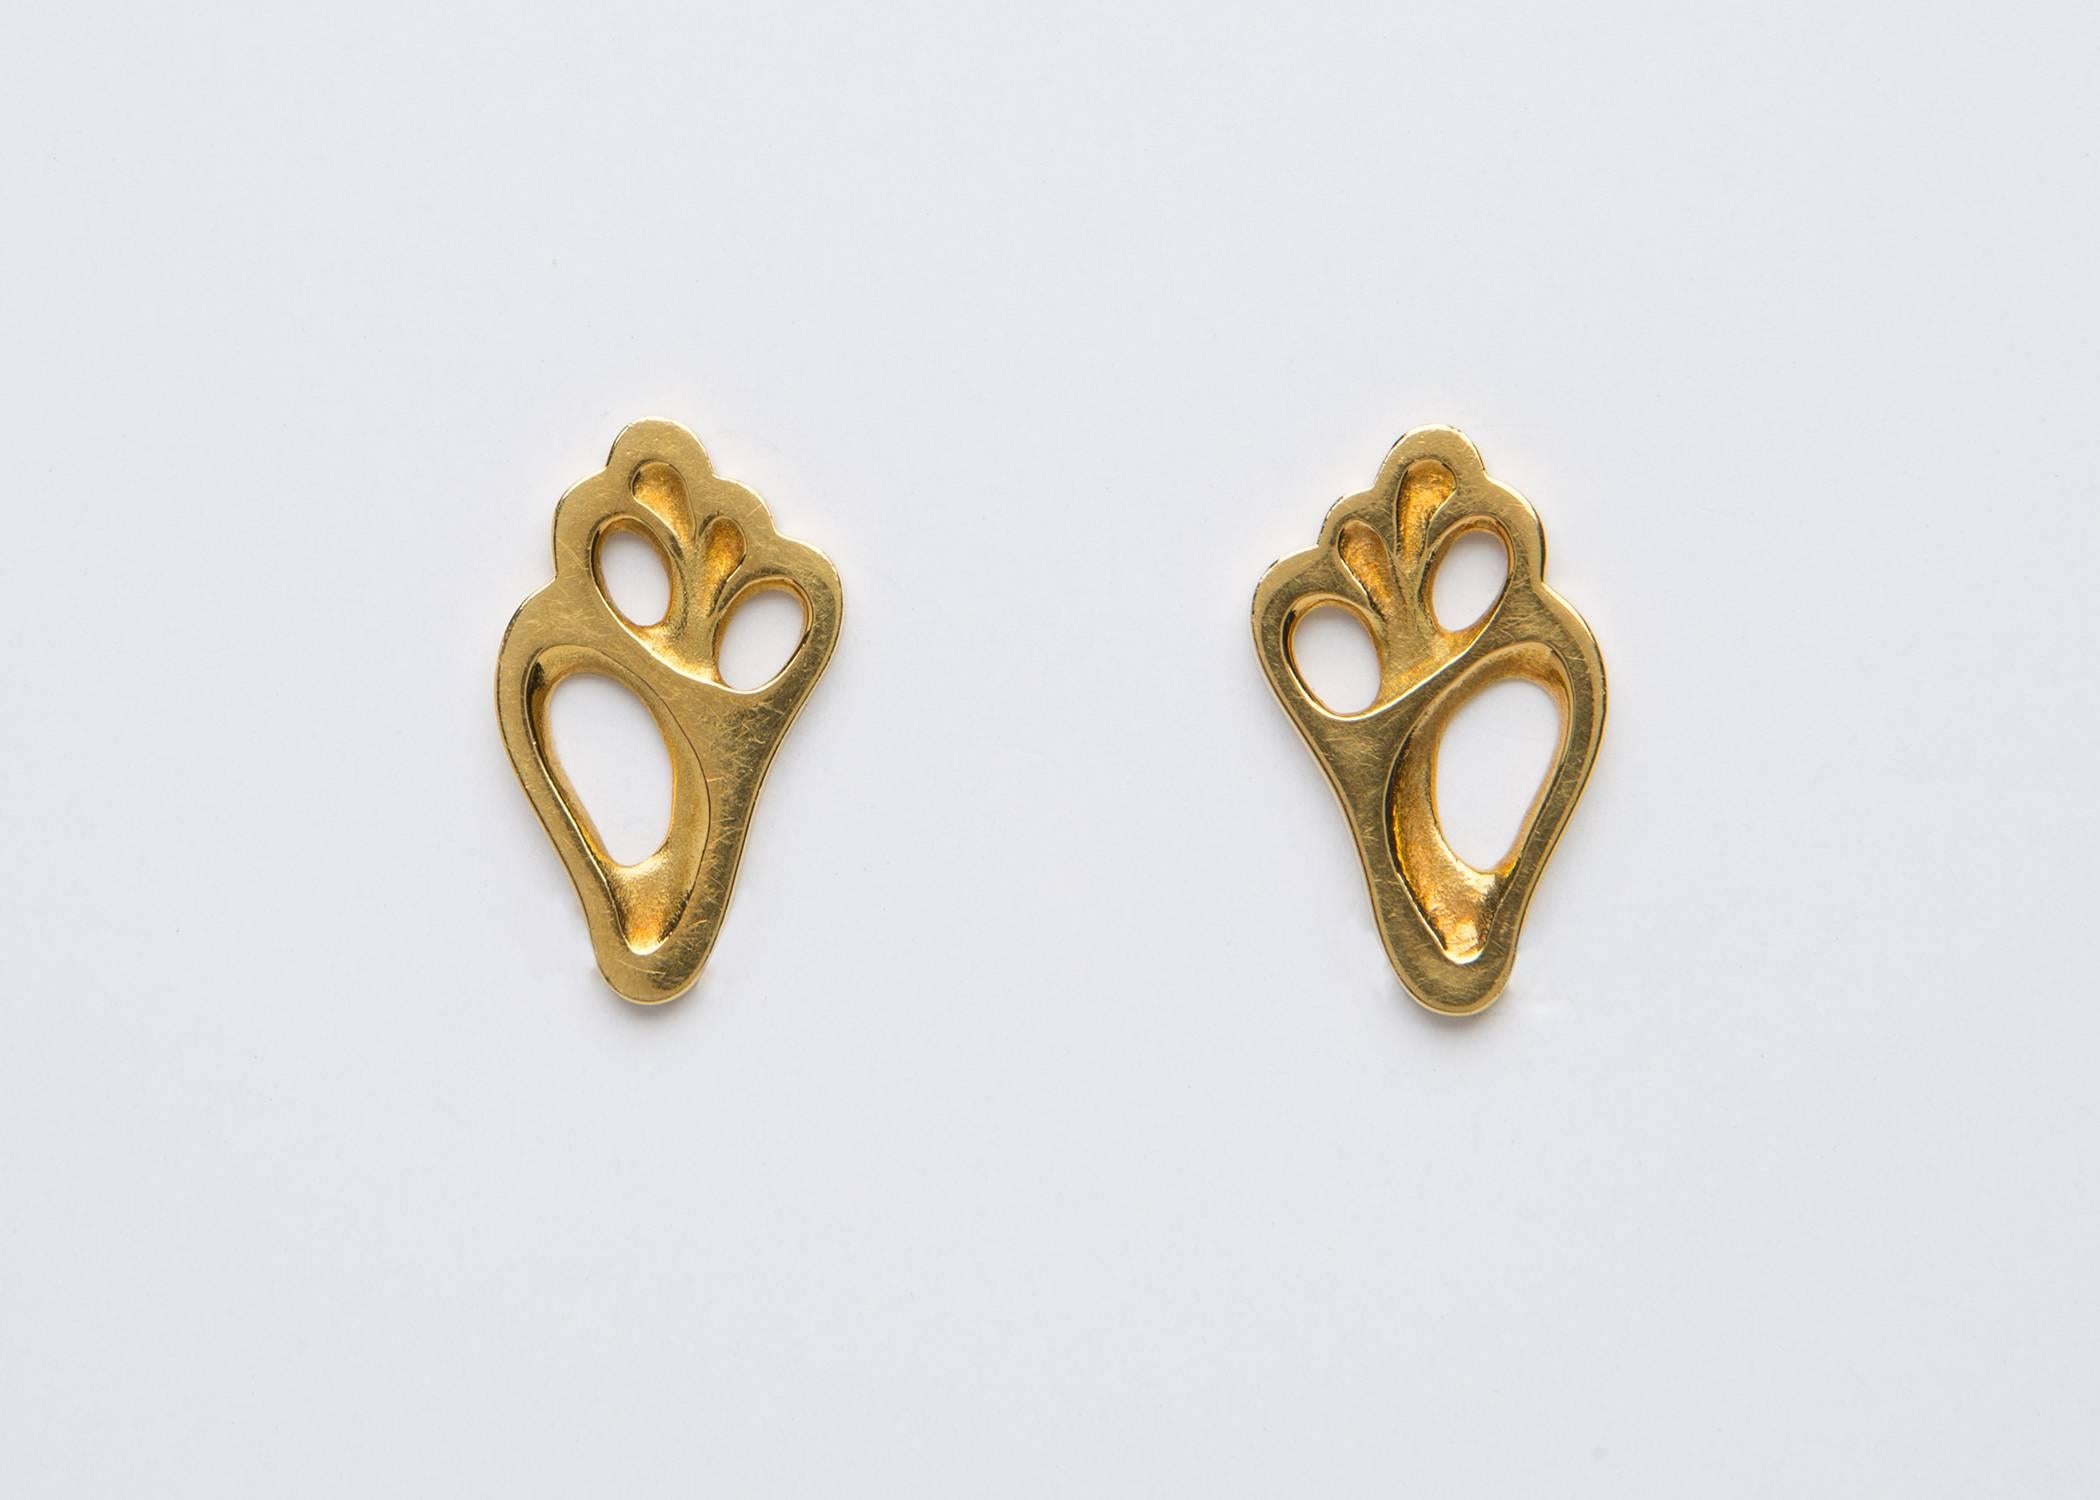 An 18k gold seashell slice creates a simple elegant earring. This is an rarely available early work by Angela Cummings for Tiffany & Co. 1 inch in length.